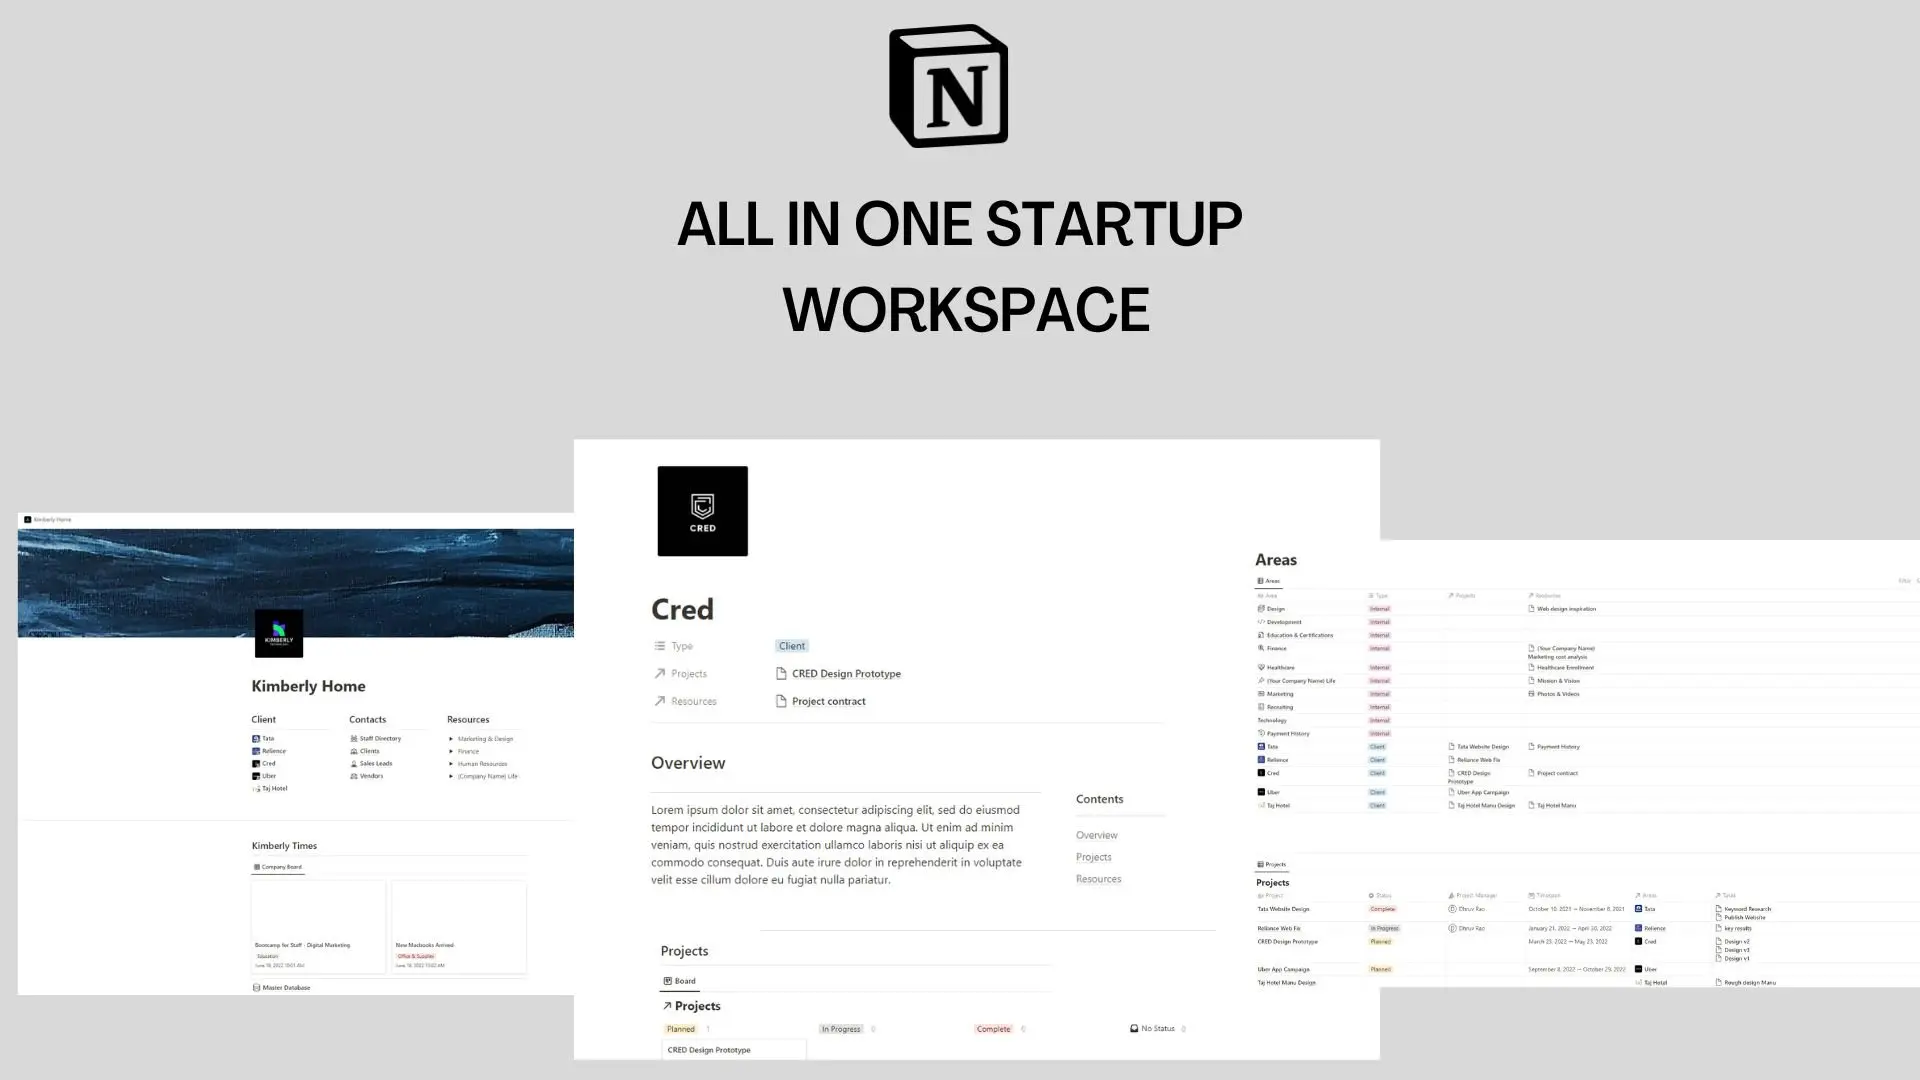 All In One Start-up Workspace image